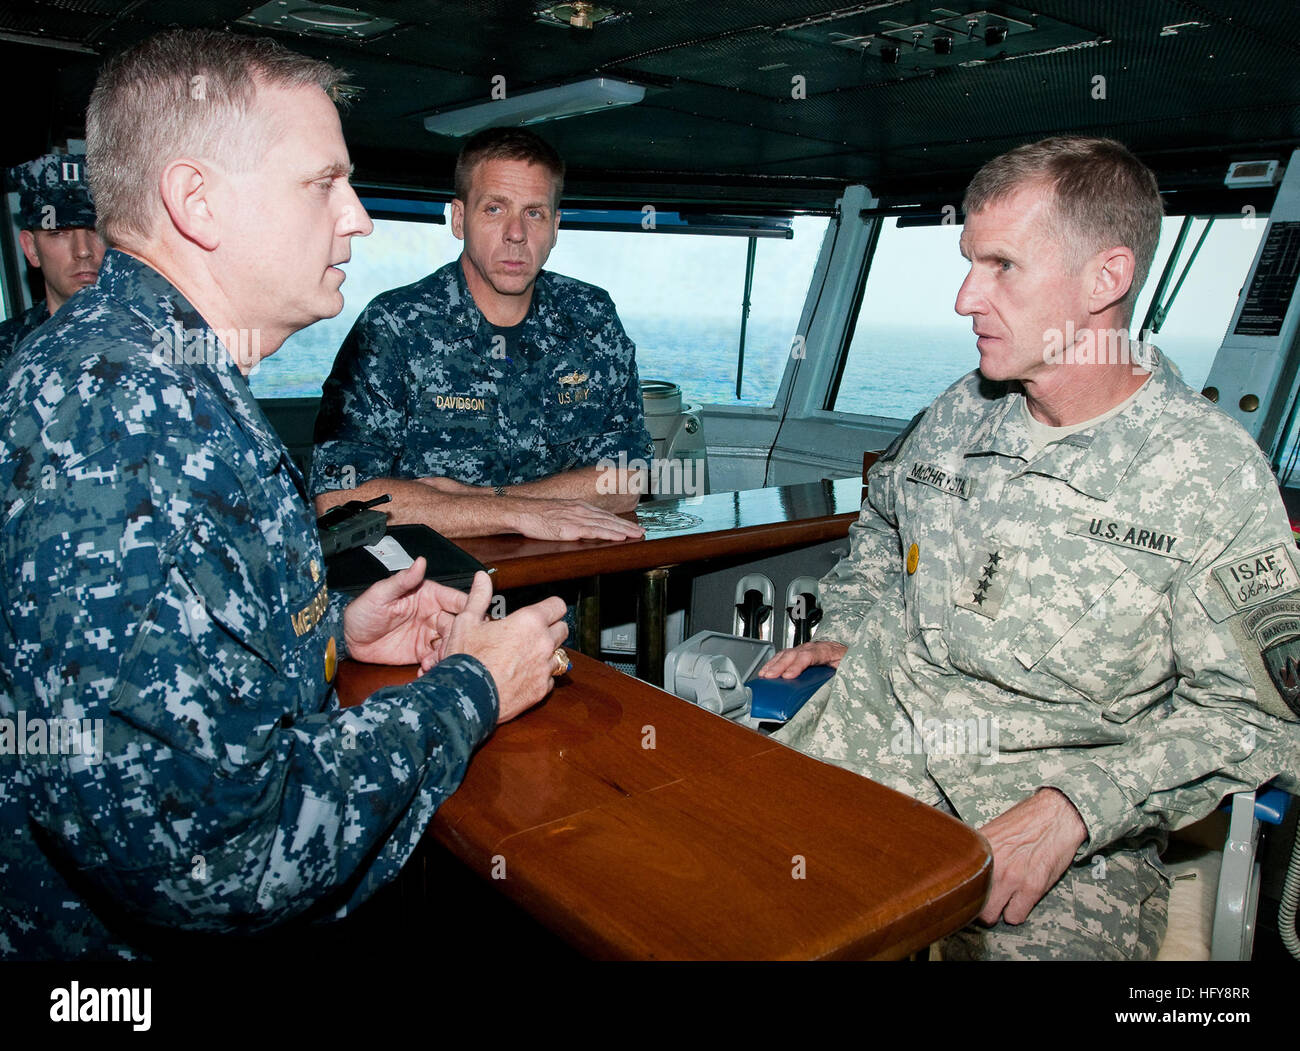 100617-N-1928O-310 ARABIAN GULF (June 17, 2010) Capt. Dee Mewbourne, left, commanding officer of the aircraft carrier USS Dwight D. Eisenhower (CVN 69), speaks with Rear Adm. Phil Davidson, commander of Carrier Strike Group 8 and Gen. Stanley McChrystal, commander of the NATO International Security Assistance Force and U.S. Forces Afghanistan, on the bridge of Dwight D. Eisenhower. McChrystal is on a battlefield circulation visit to the ship. The Eisenhower Carrier Strike Group is supporting Operation Enduring Freedom. (U.S. Navy photo by Mass Communication Specialist 1st Class Mark OÕDonald/R Stock Photo